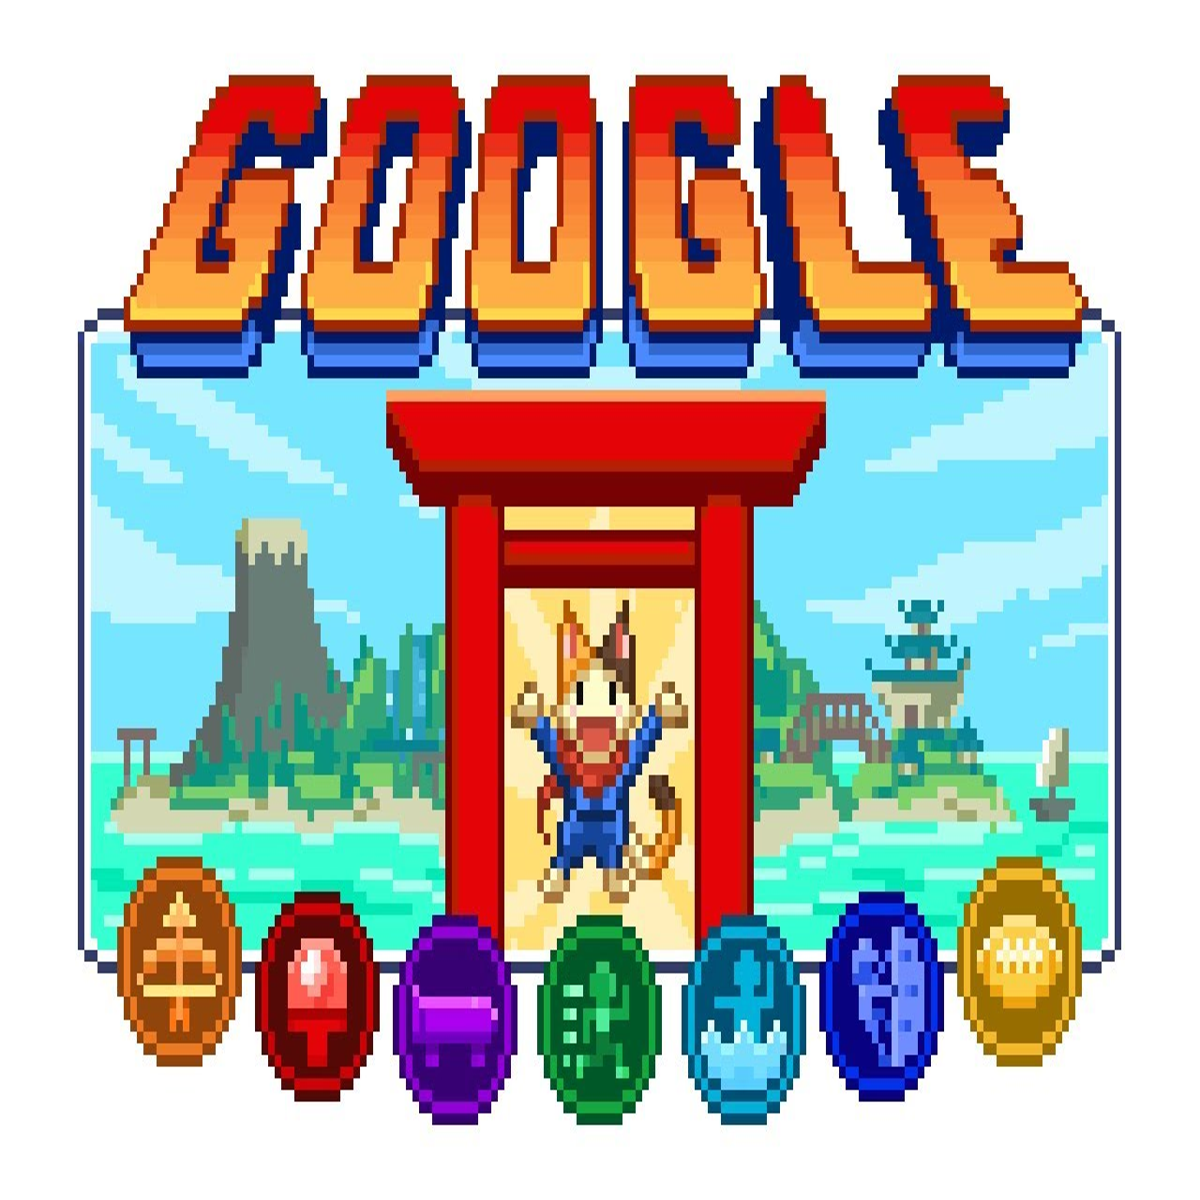 Popular Google Doodle games revived: Here's how to play